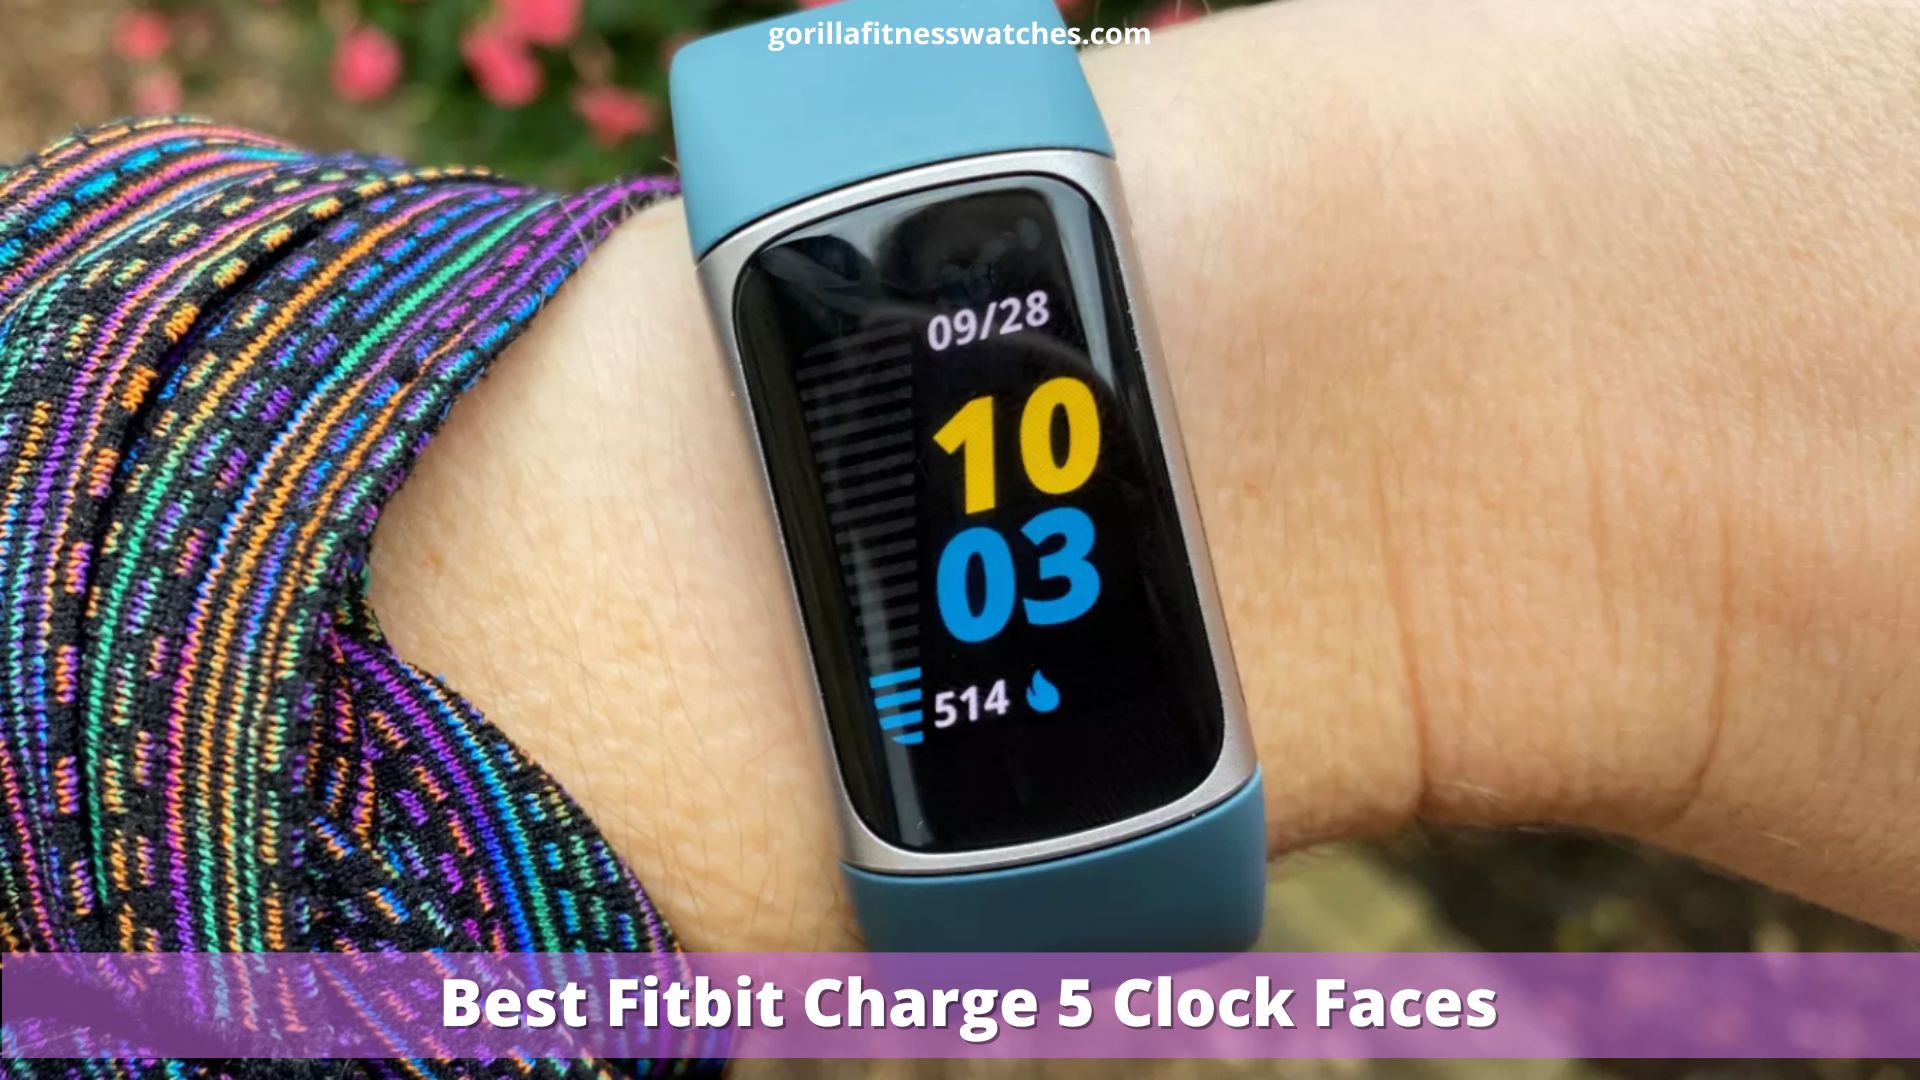 Best Fitbit Charge 5 Clock Faces